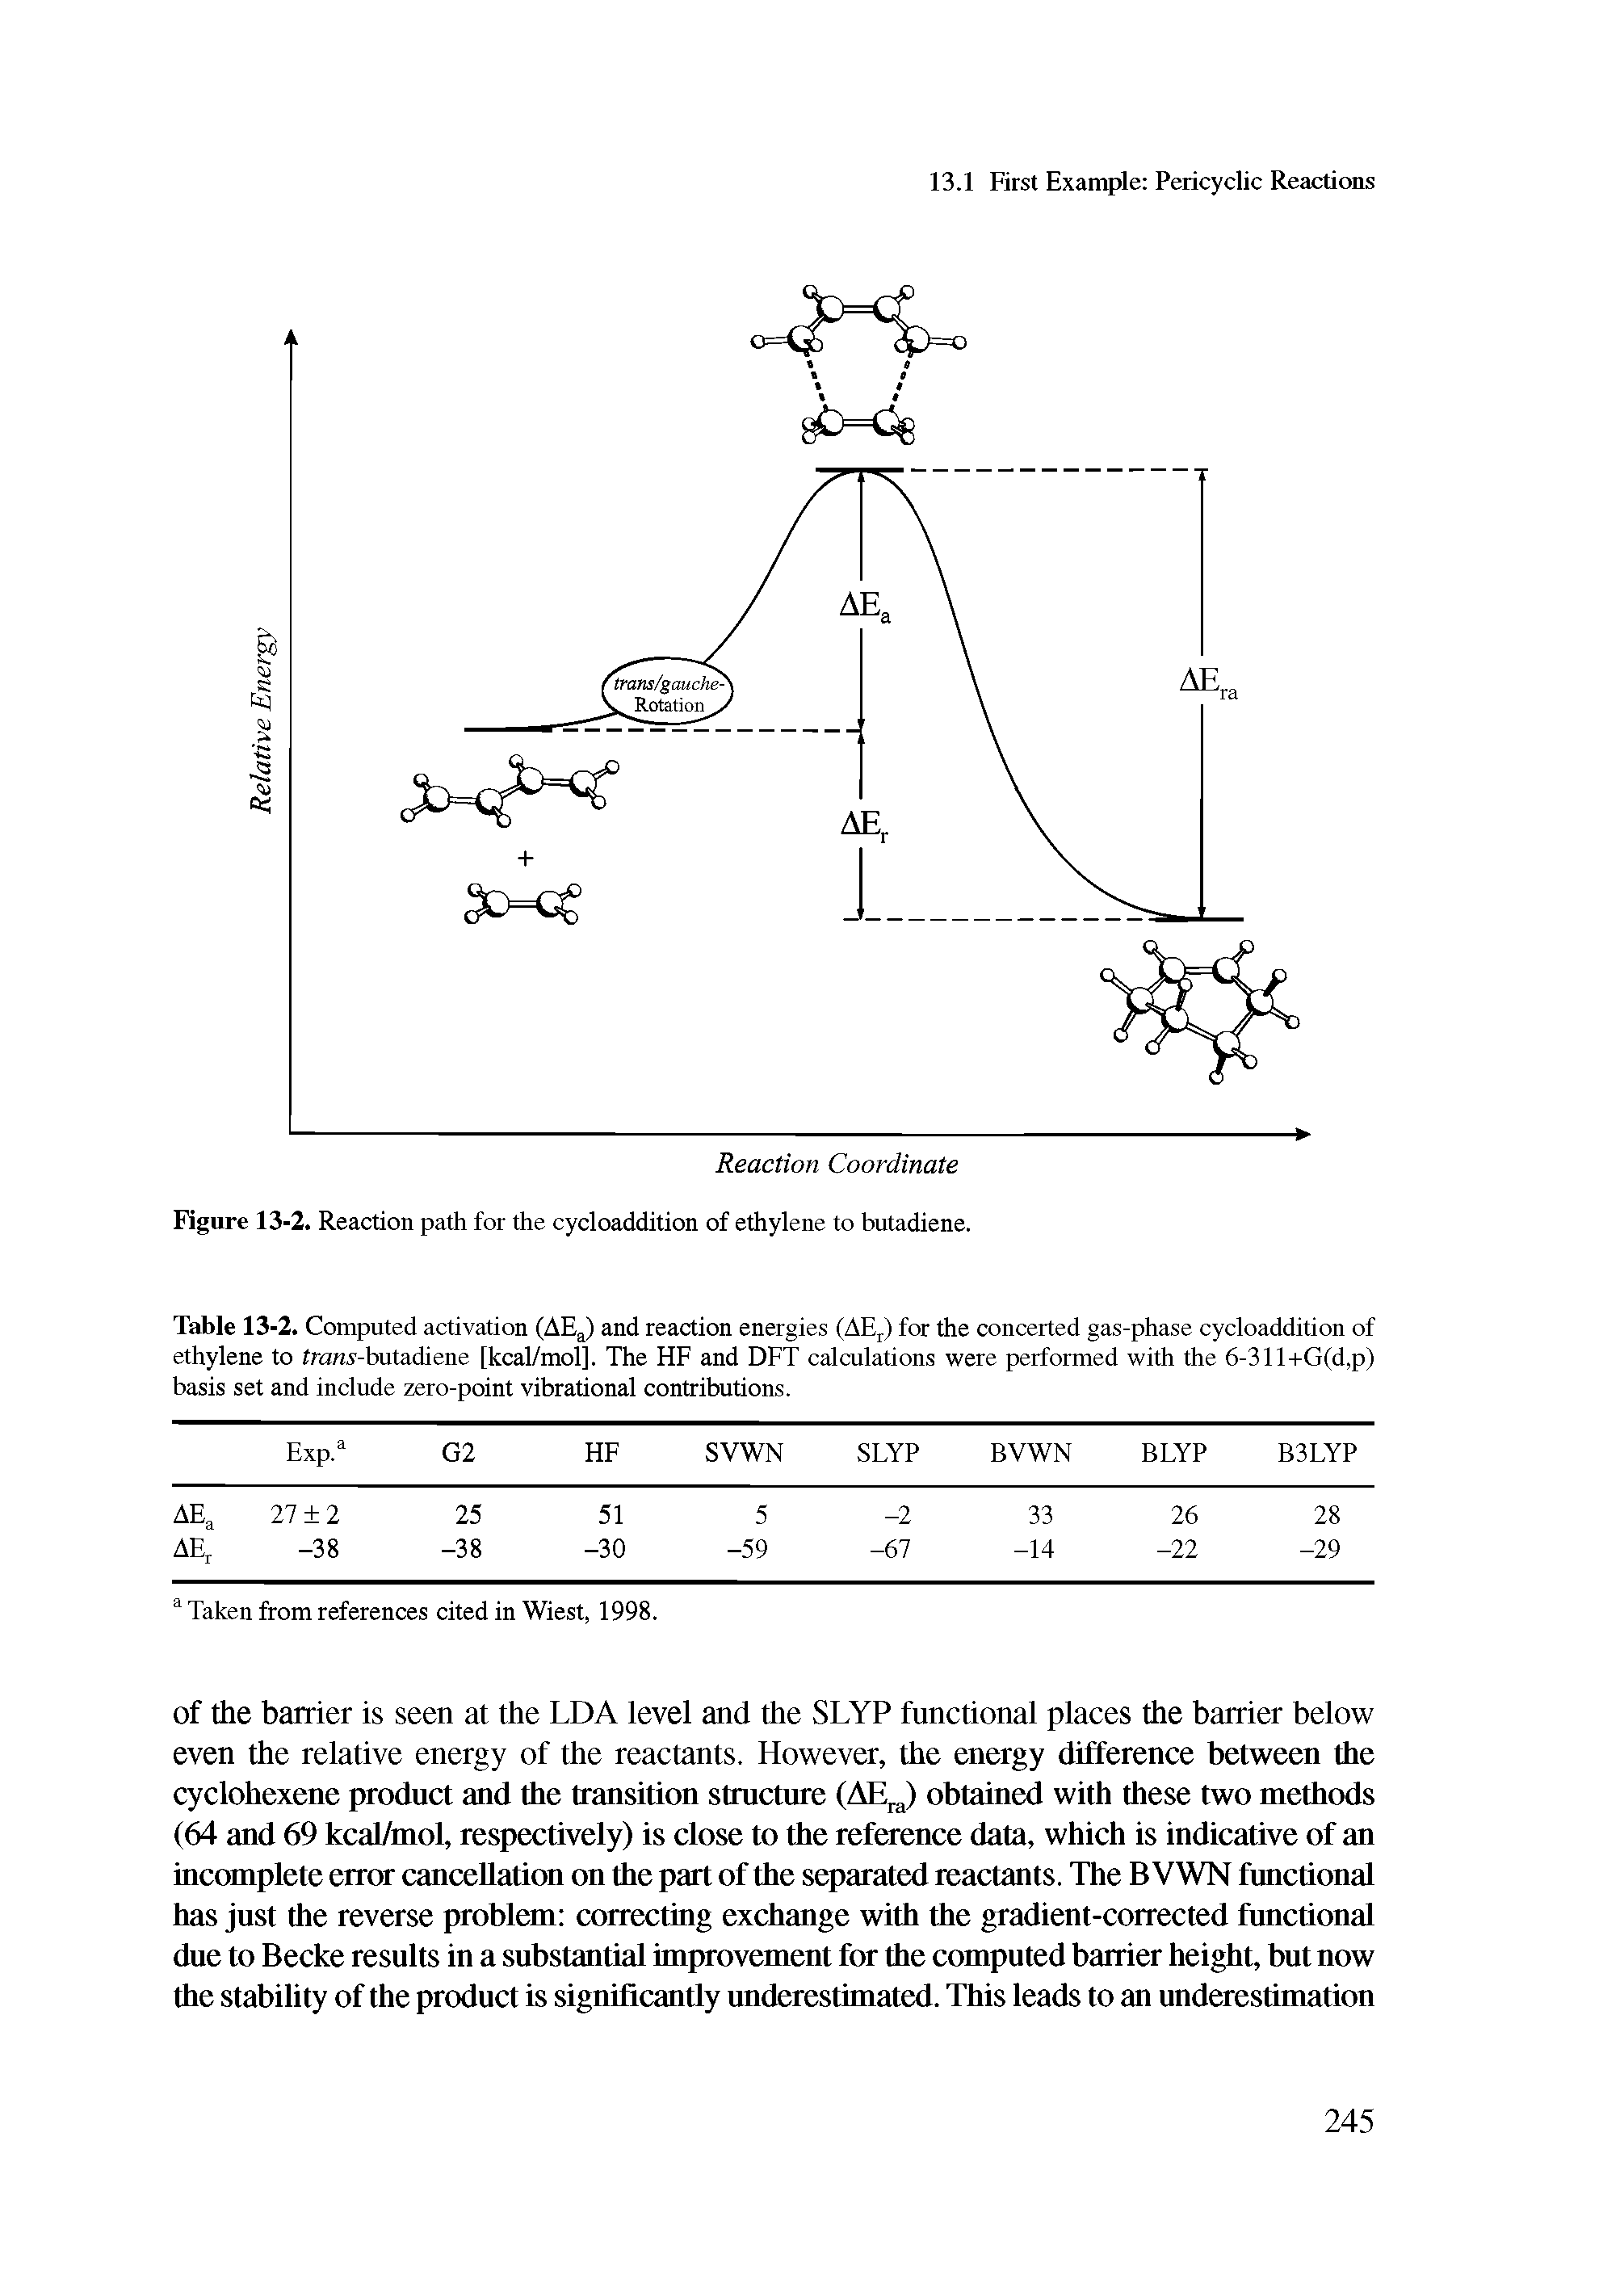 Table 13-2. Computed activation (AEa) and reaction energies (AEr) for the concerted gas-phase cycloaddition of ethylene to Irans-butadiene [kcal/mol]. The HF and DFT calculations were performed with the 6-311+G(d,p) basis set and include zero-point vibrational contributions.